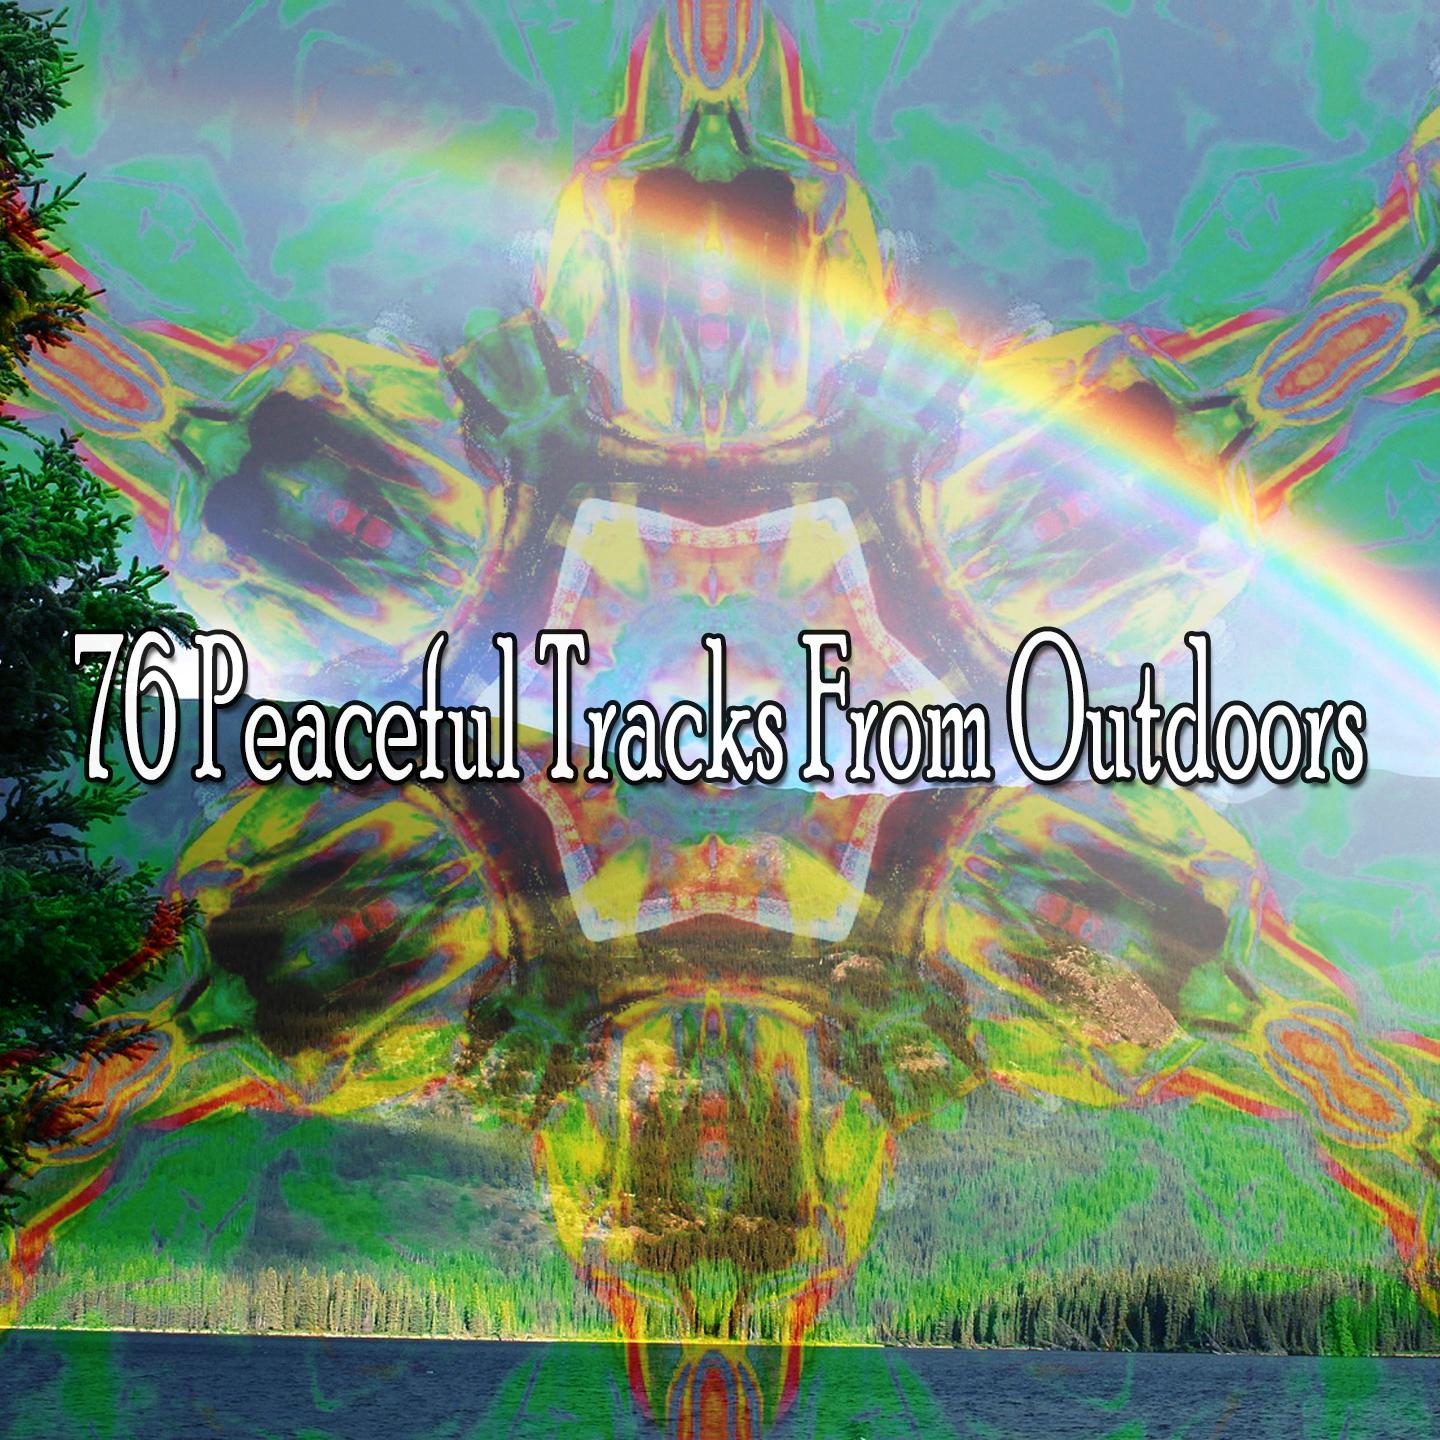 76 Peaceful Tracks from Outdoors